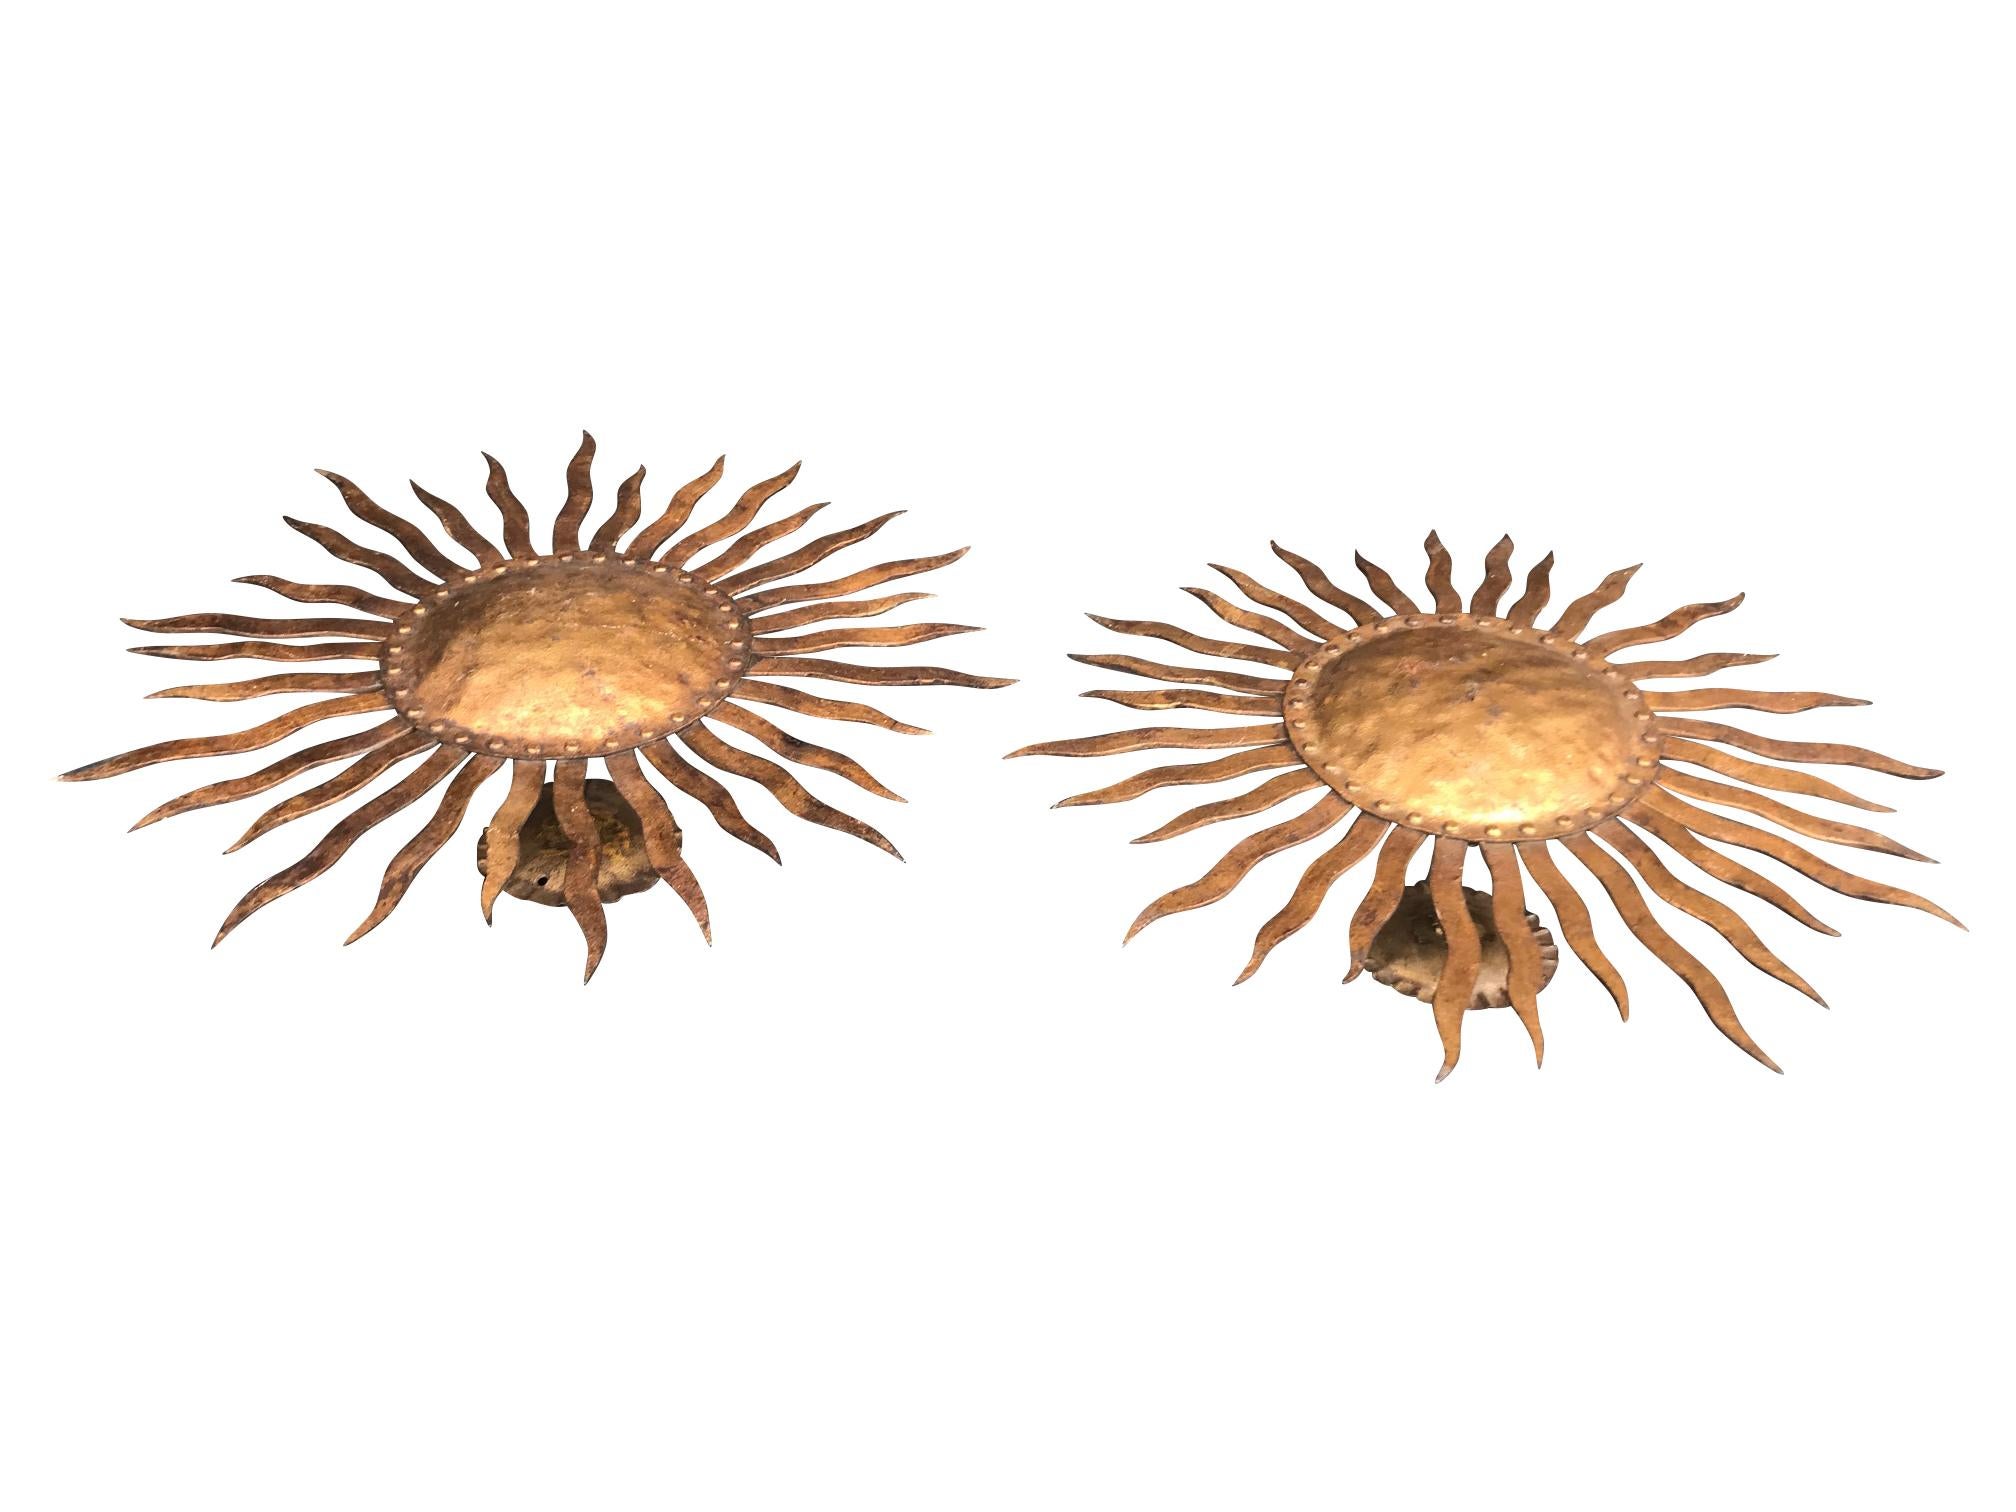 A pair of large 1950s wrought iron sunburst wall sconces with gilt finish. Each sconce is mounted from a scolloped base plate with central rod, so they can be mounted on the wall or ceiling. Each has 2 light fittings behind and re-wired and PAT